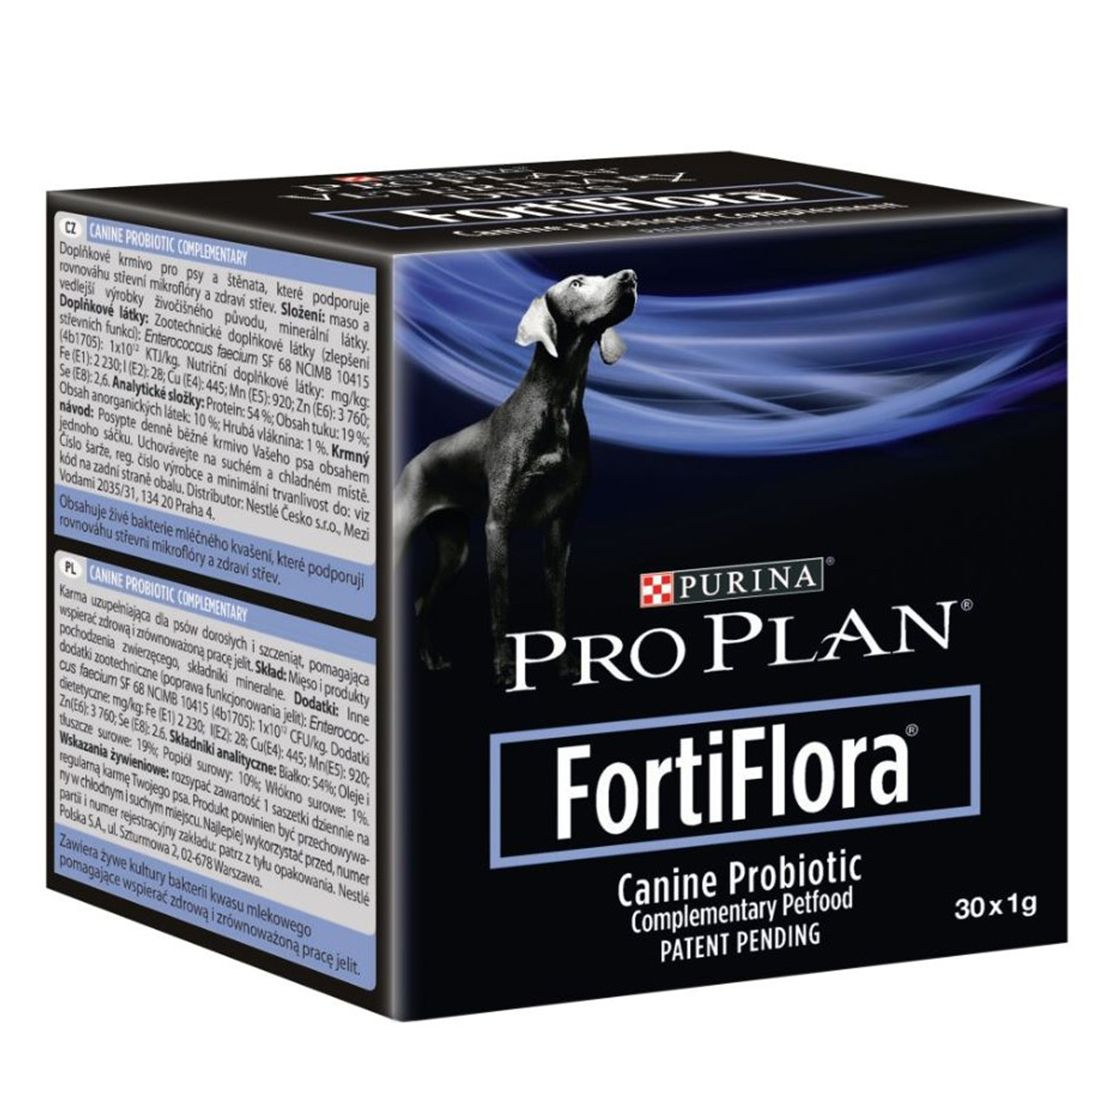 Purina Pro Plan Veterinary Diets Canine FortiFlora Probiotic 30 x 1 g